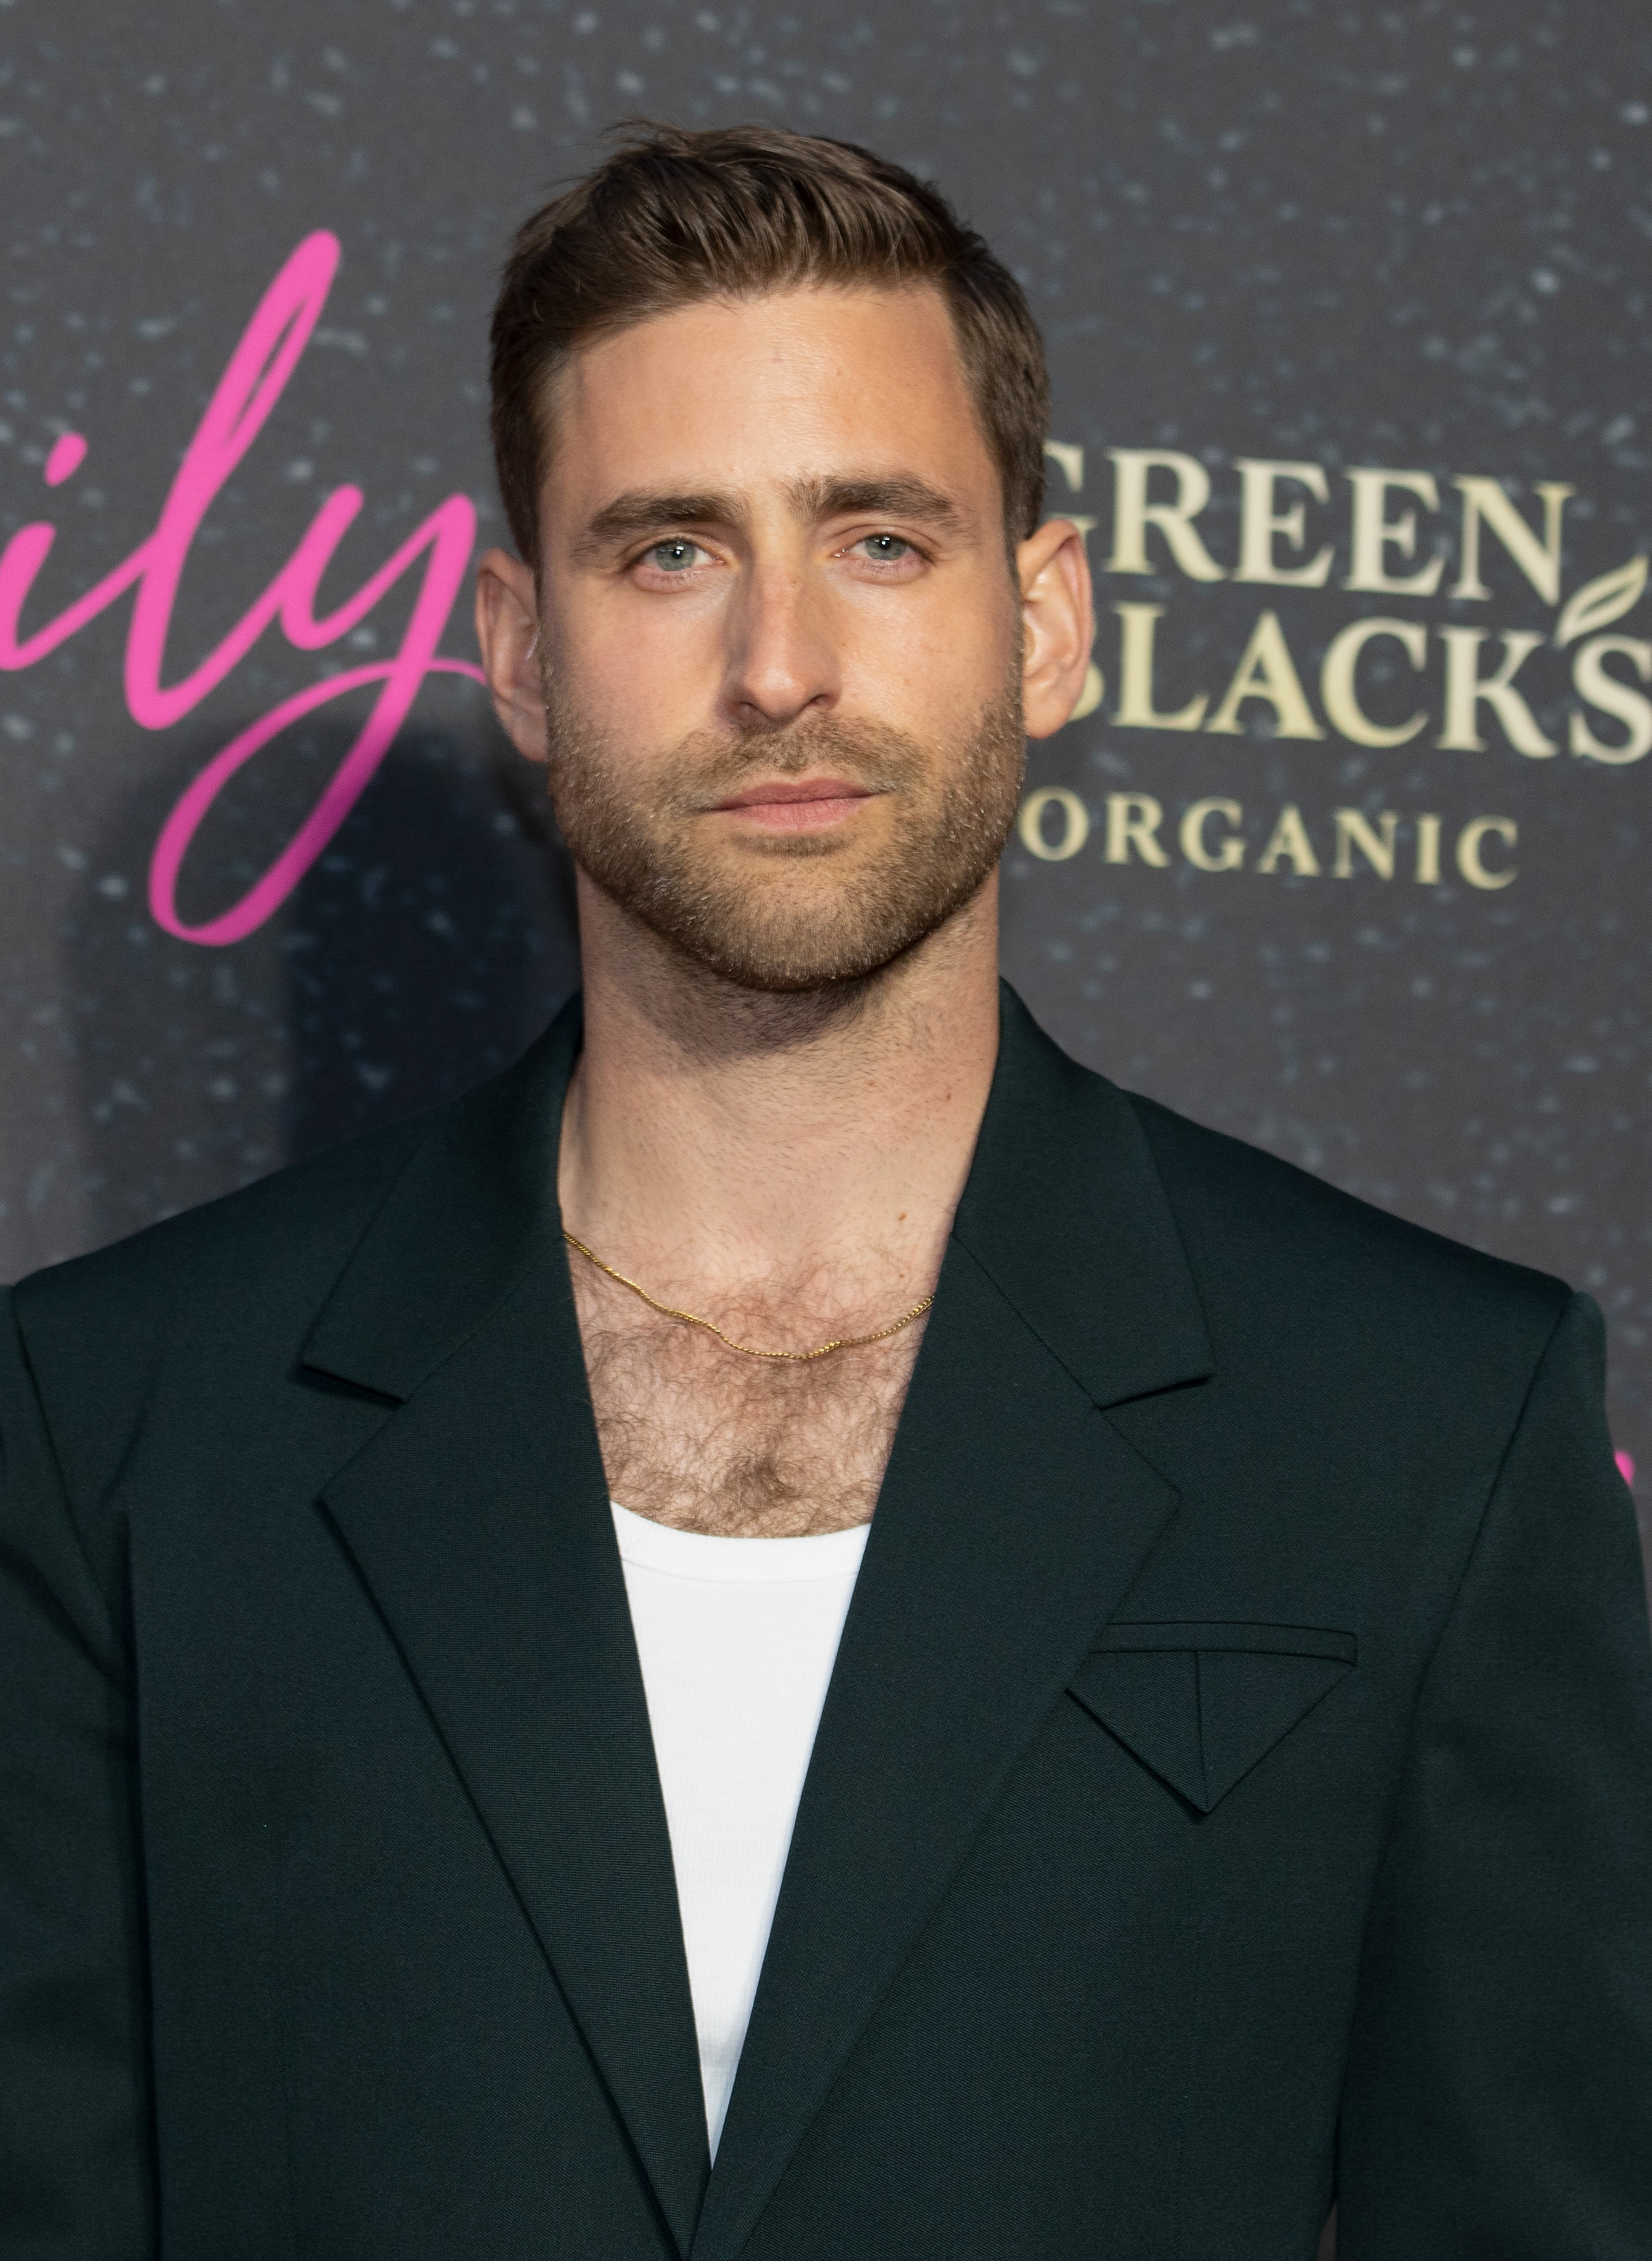 Oliver Jackson-Cohen at the UK premiere of "Emily" on October 4, 2022, in London, England. | Source: Getty Images